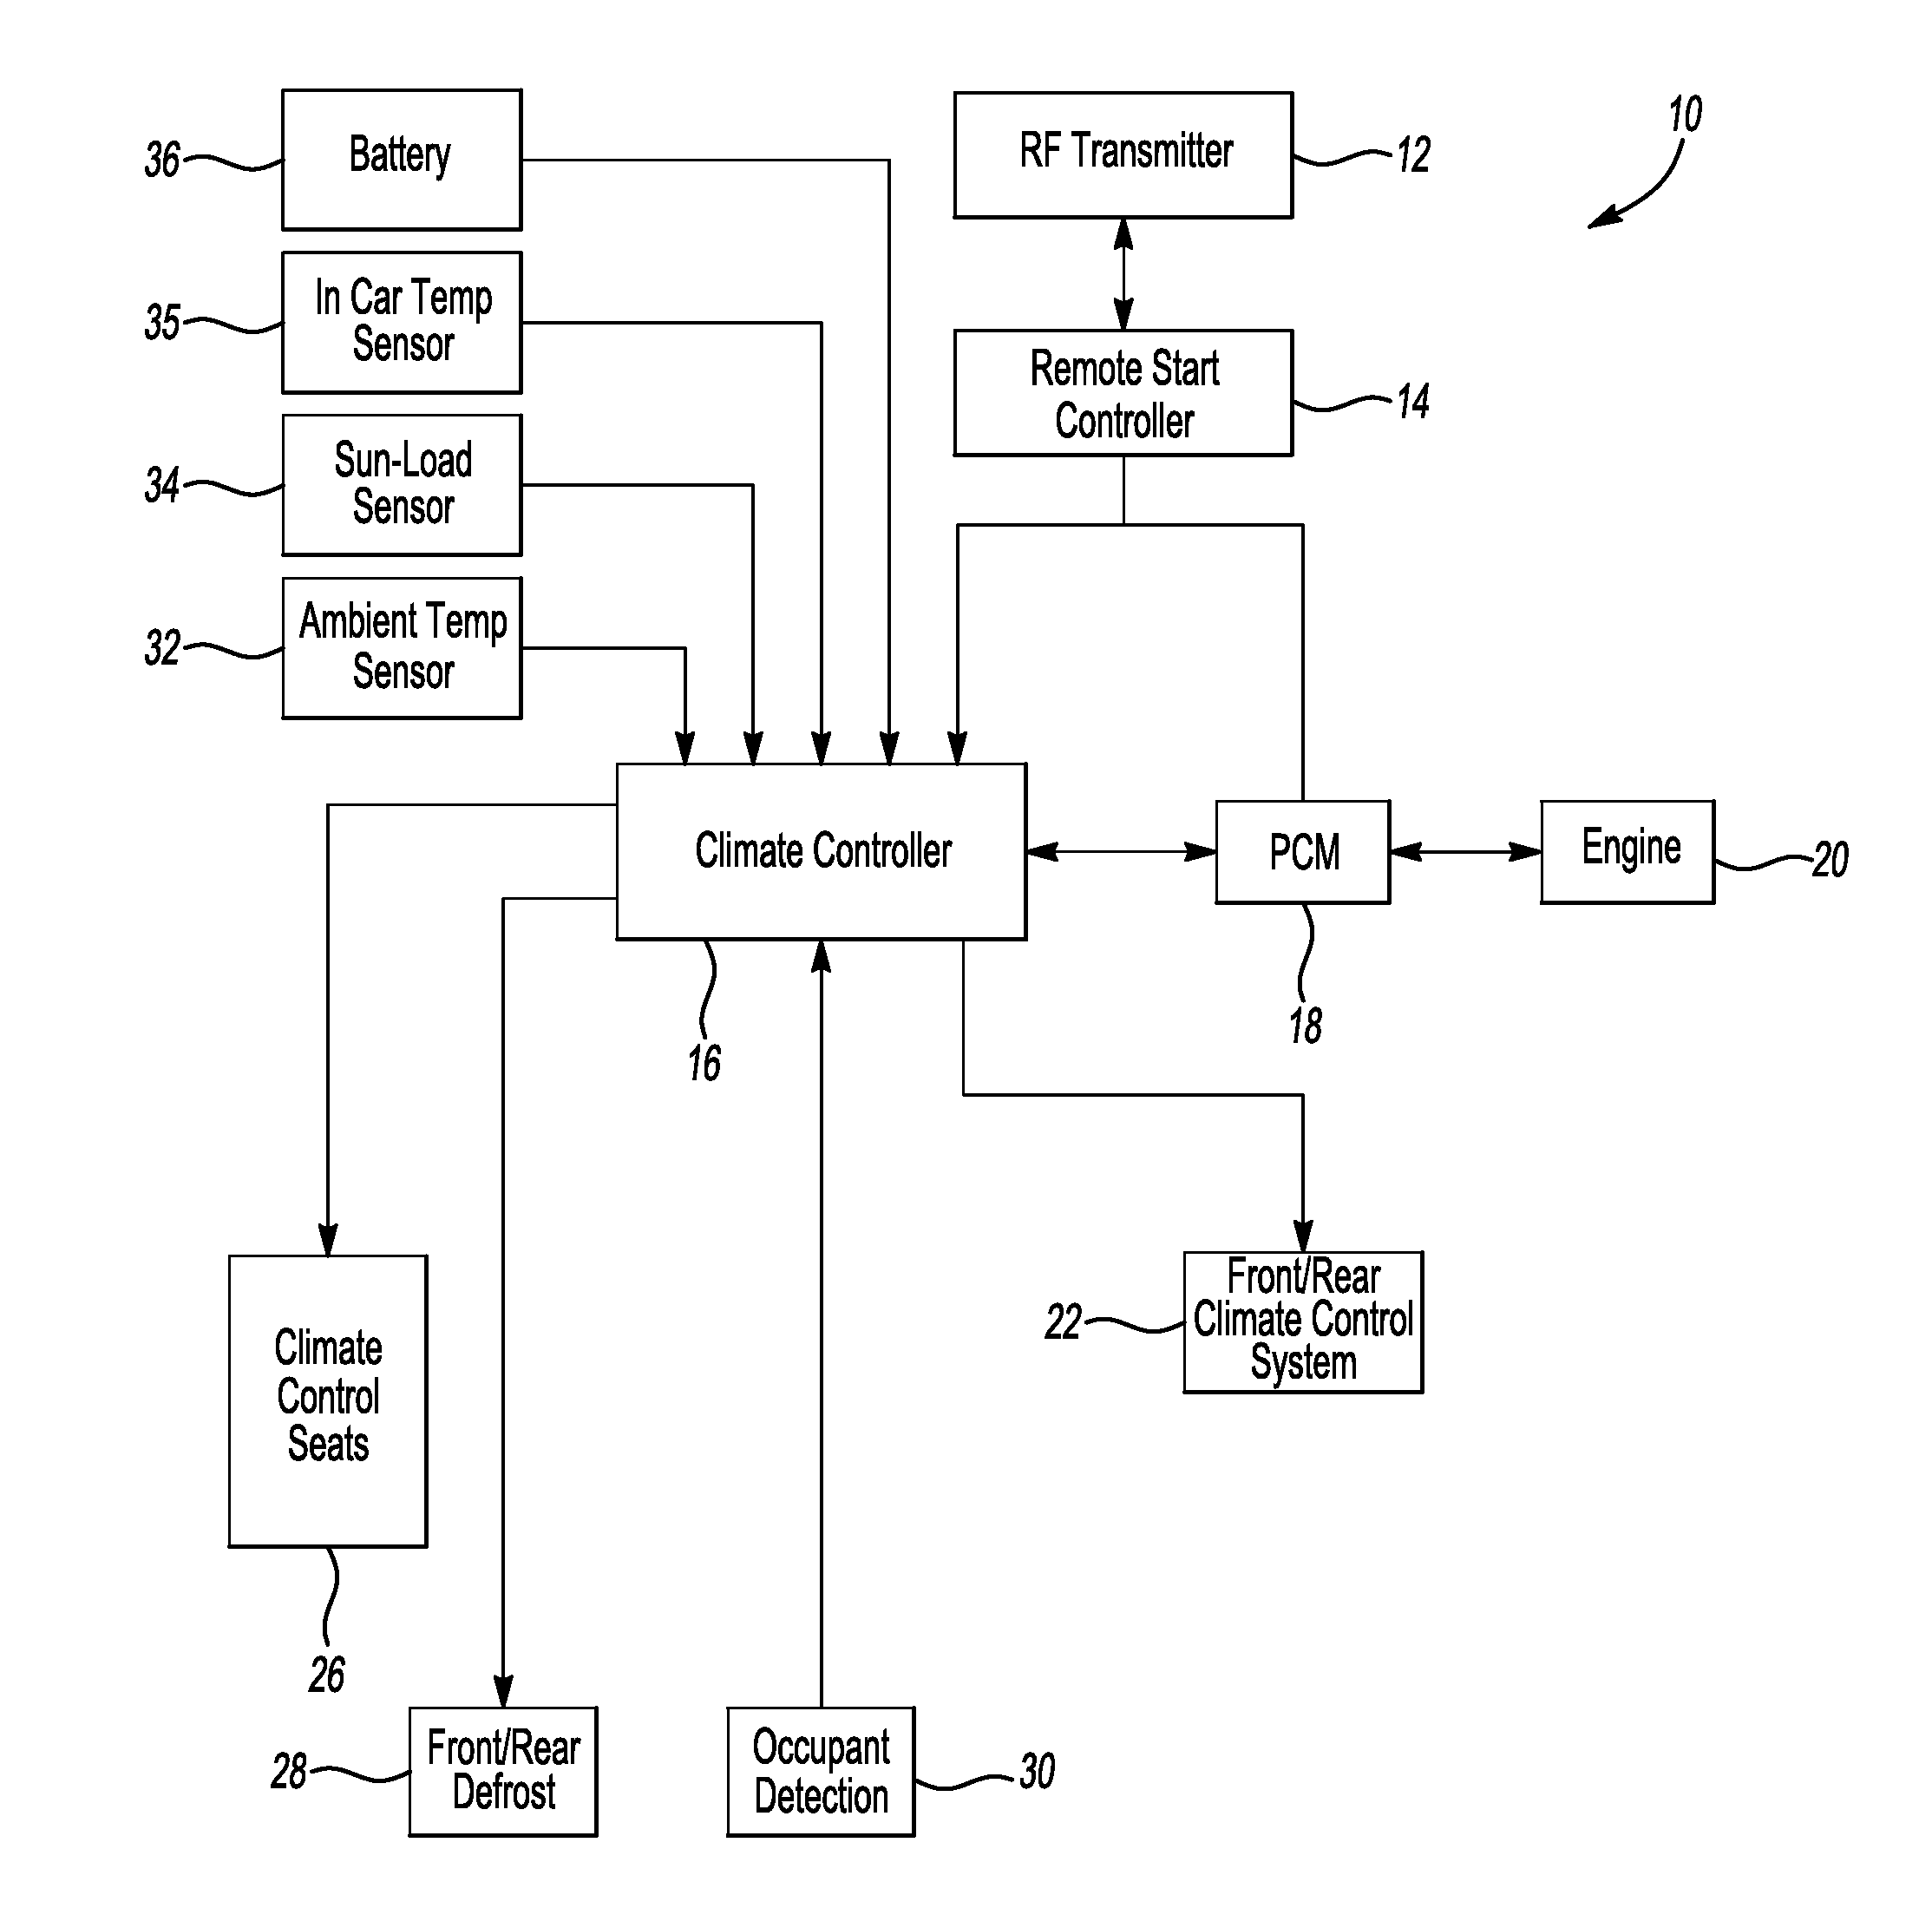 System and method for controlling a climate control system with remote start operation